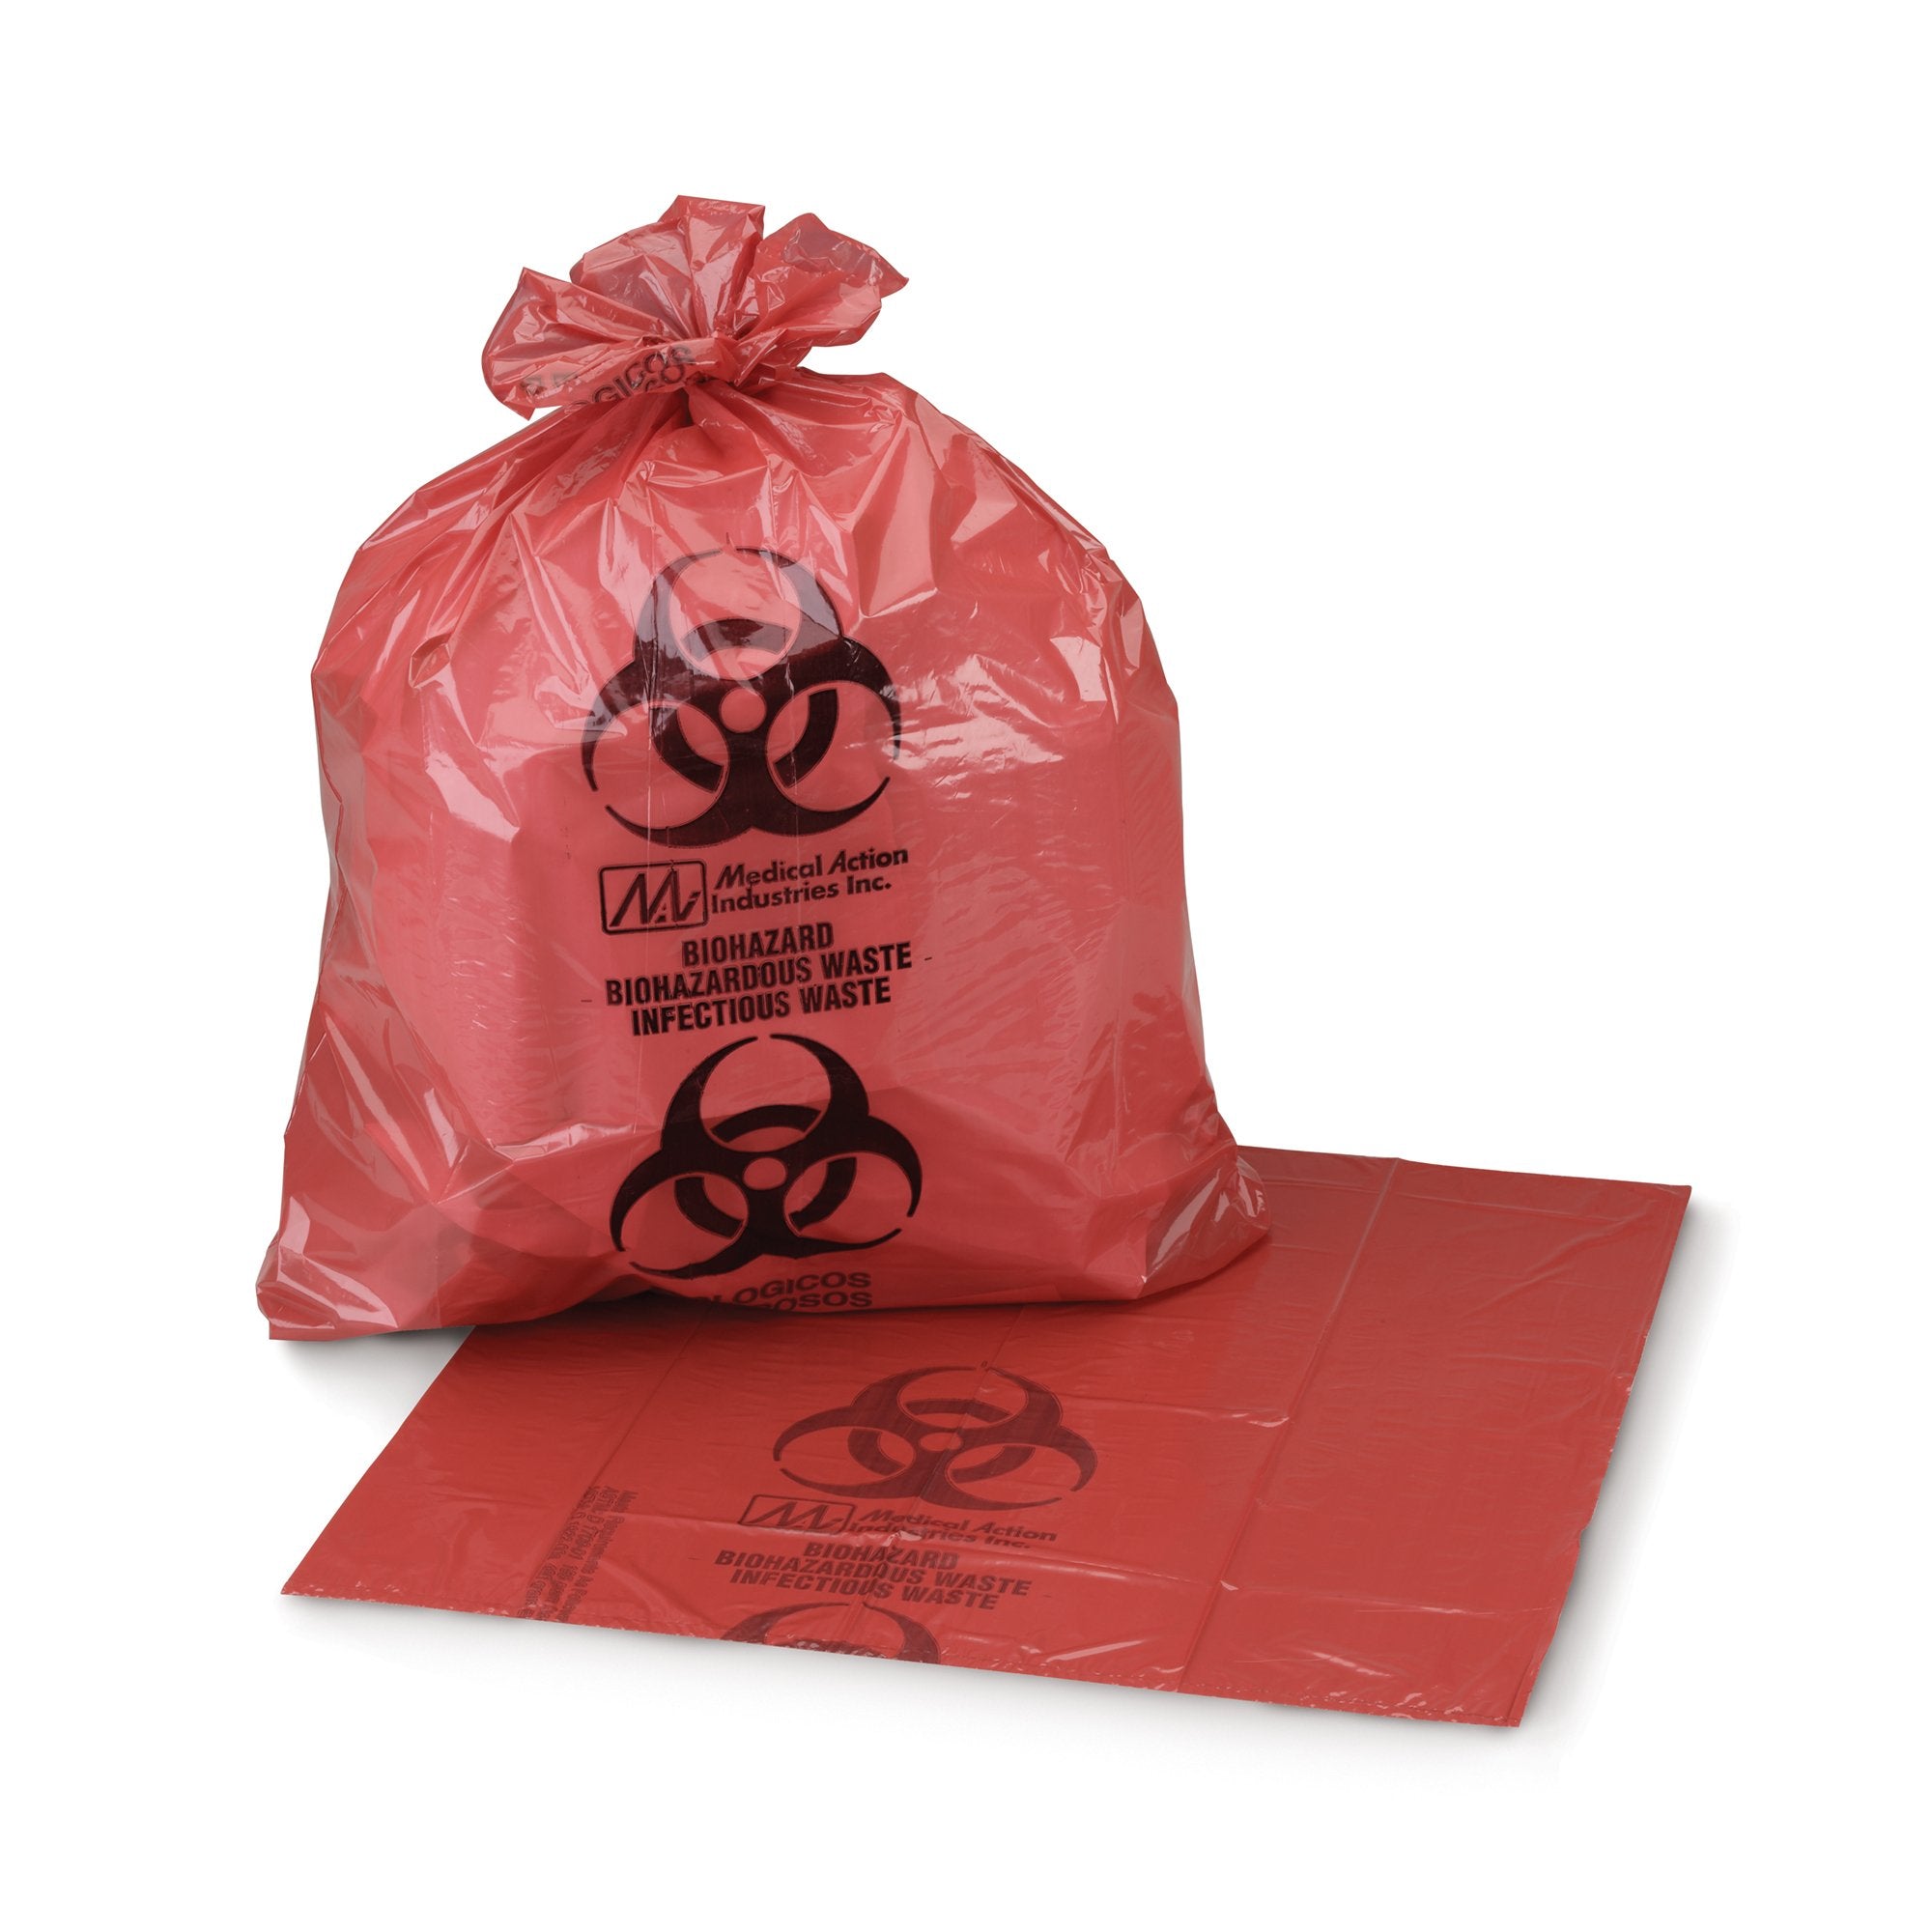 Infectious Waste Bag McKesson 40 to 45 gal. Red Bag 17 X 23 X 46 Inch